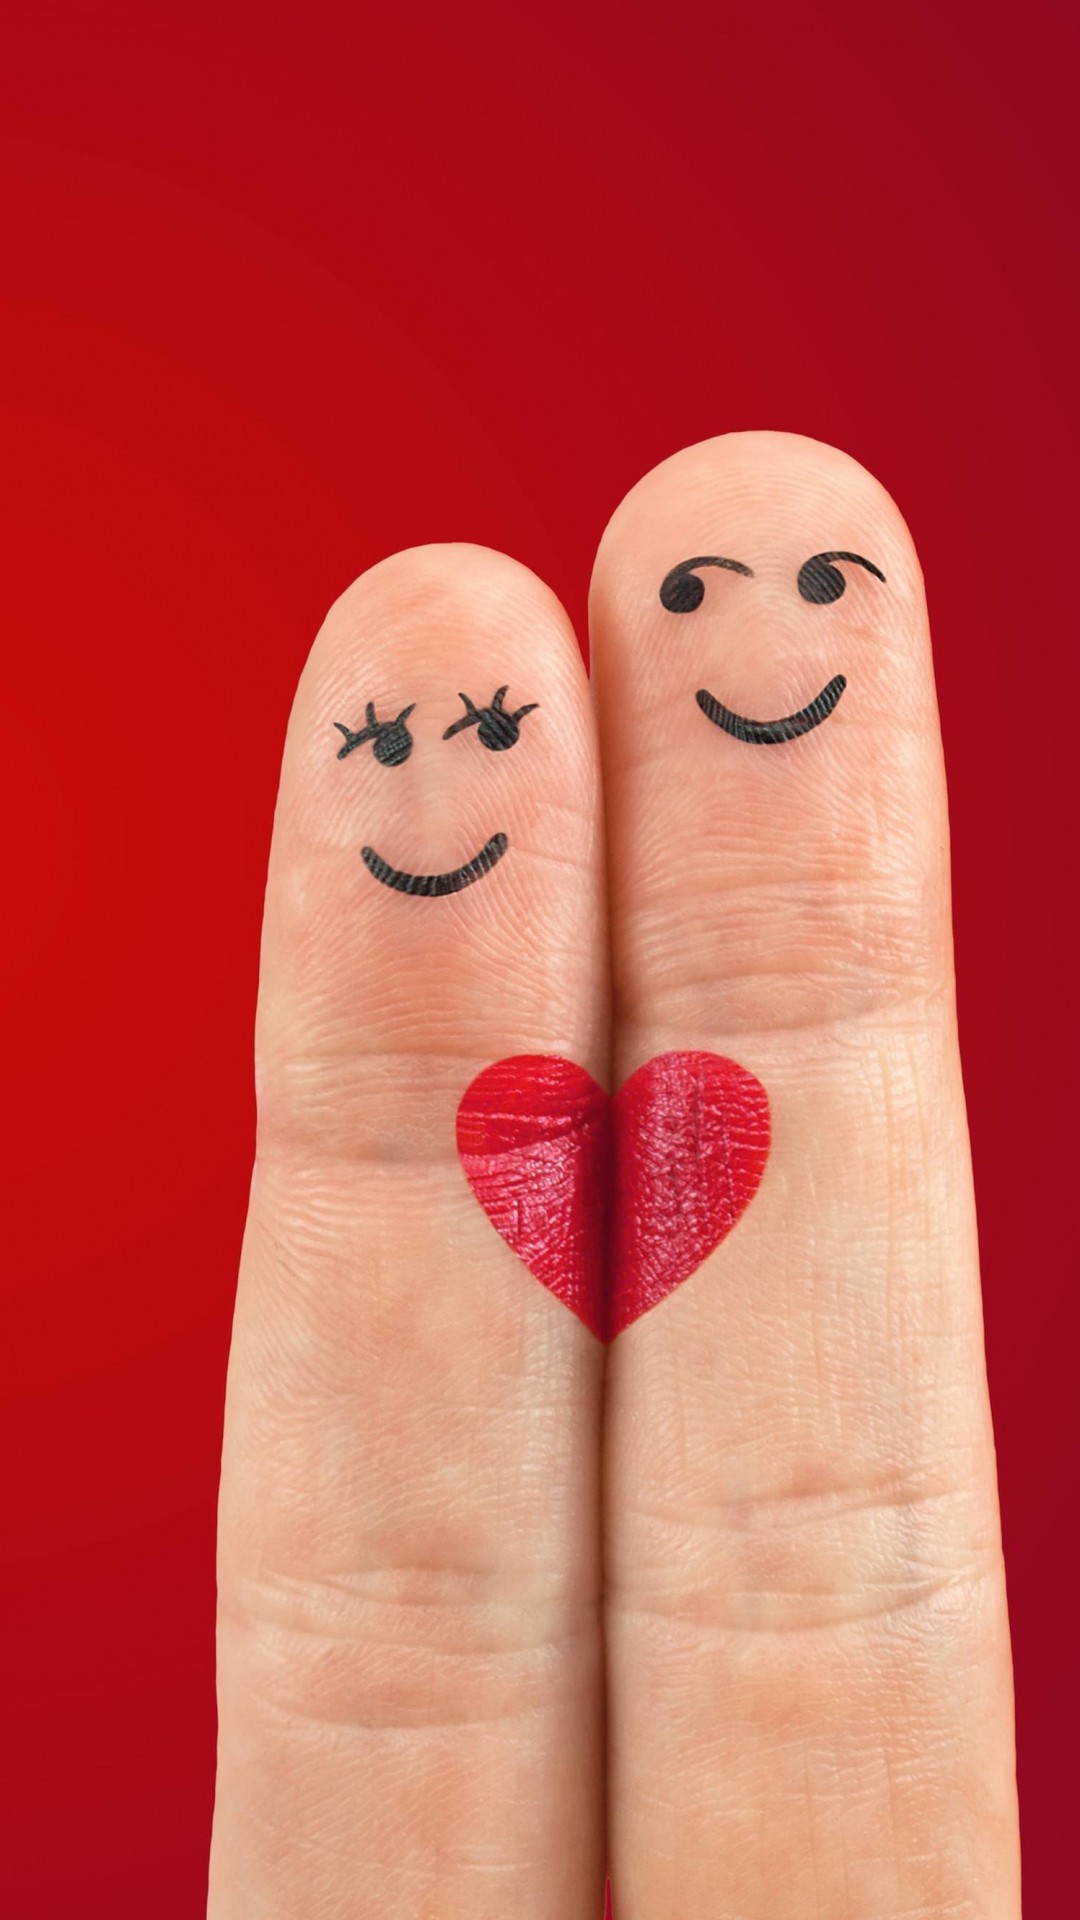 Fingers in Love Wallpaper for SAMSUNG Galaxy Note 3